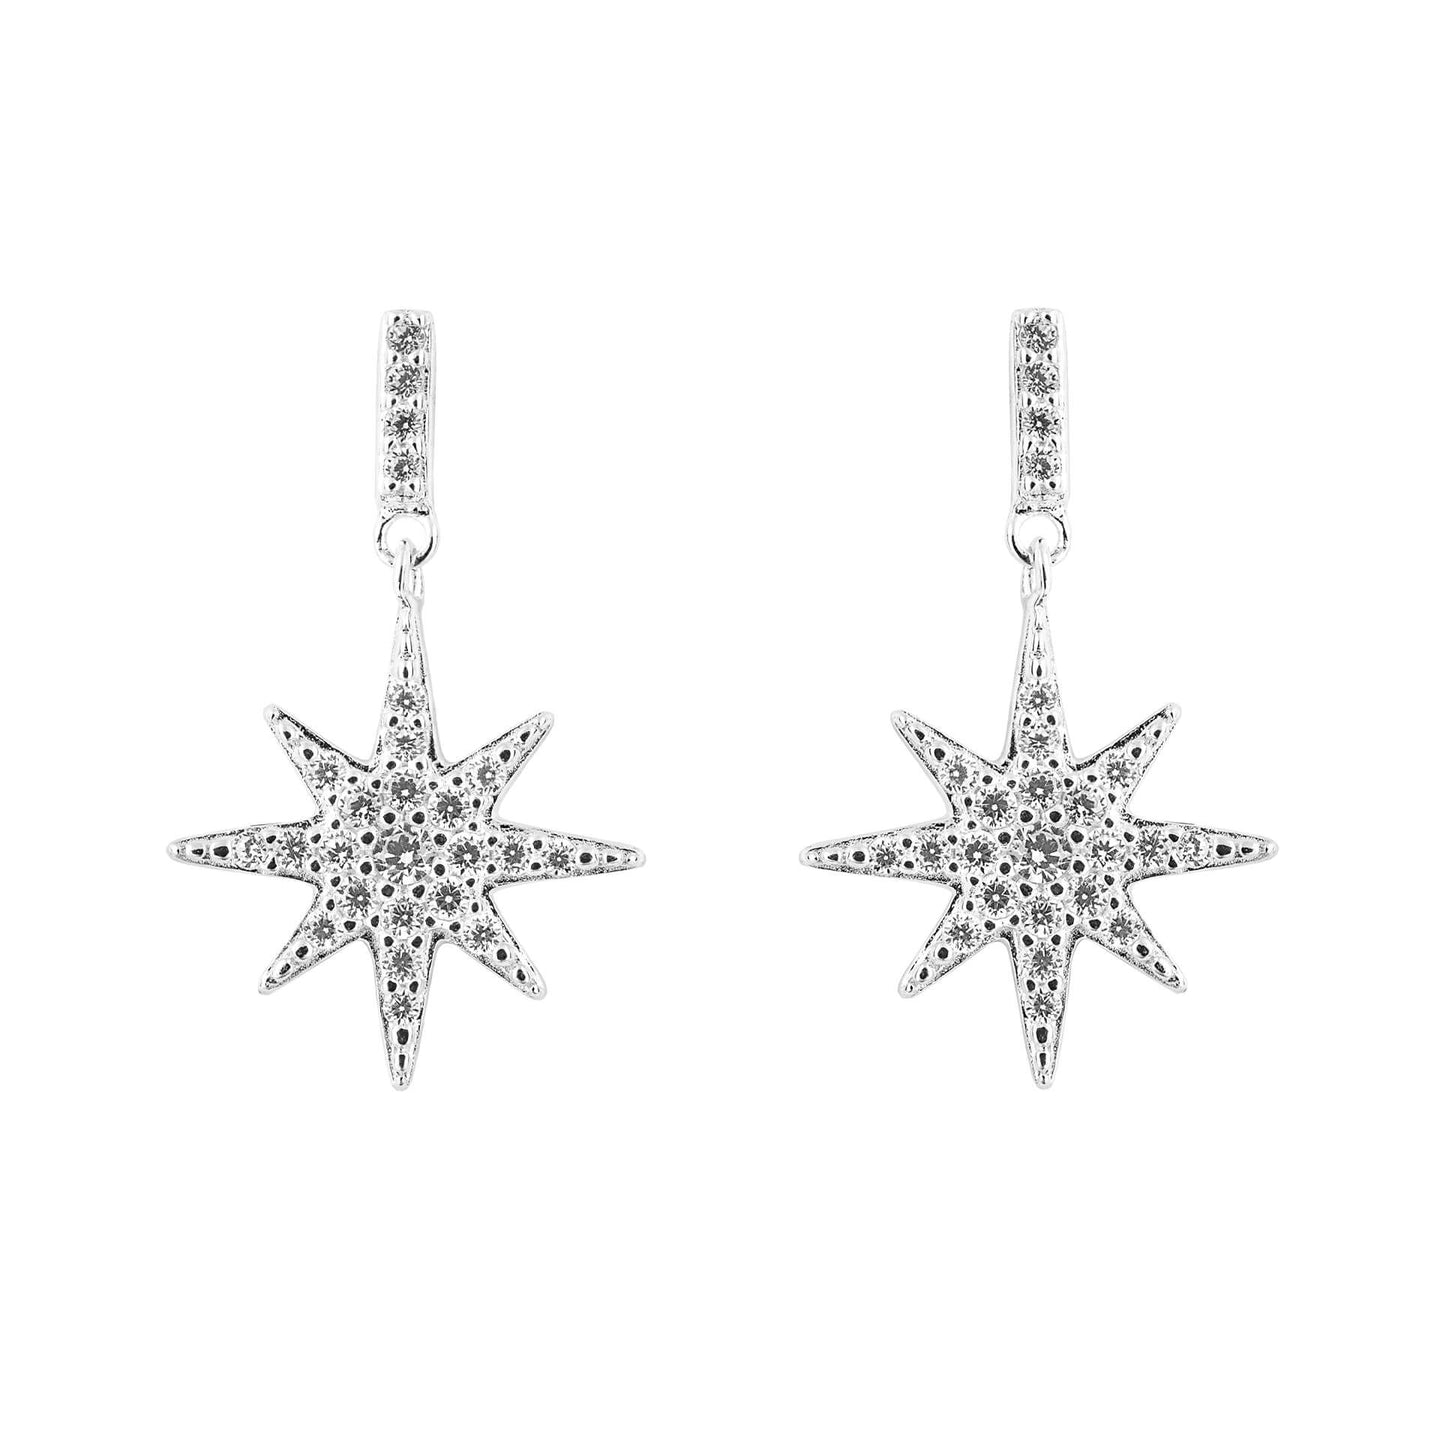 Sterling Silver Starburst Drop Earrings with Pave Cubic Zirconia